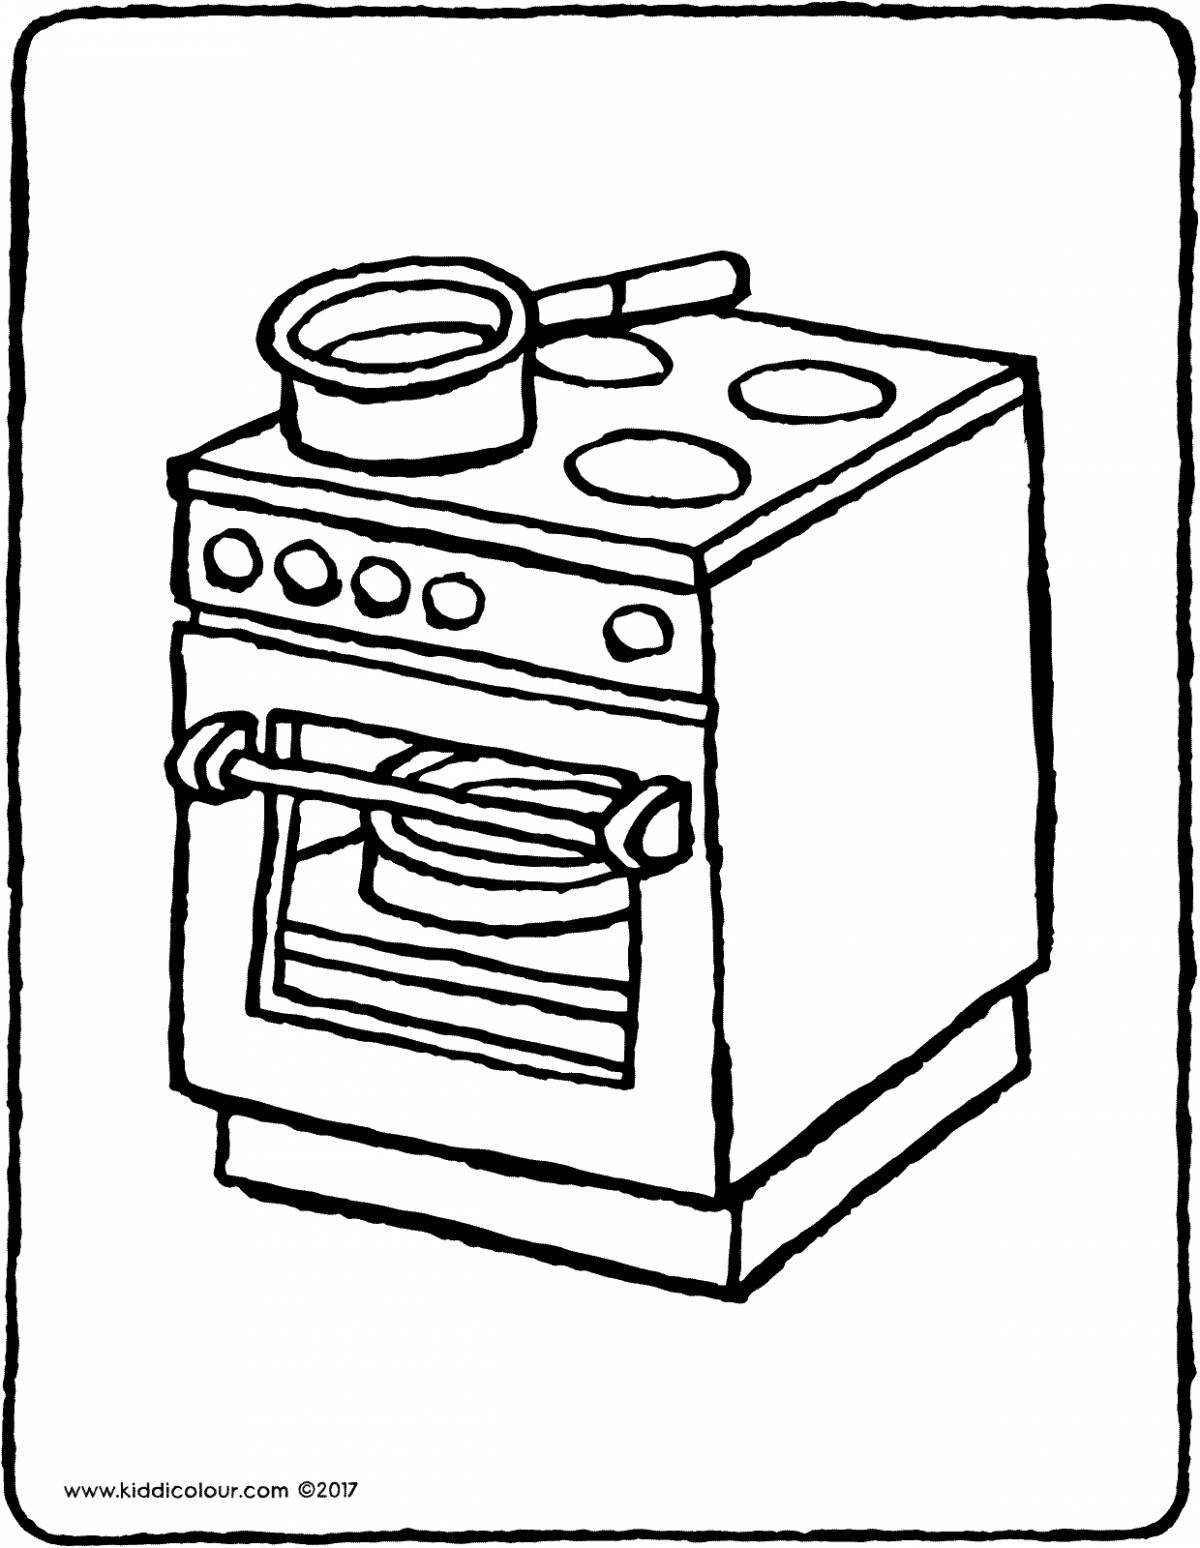 Colored oven coloring book for children